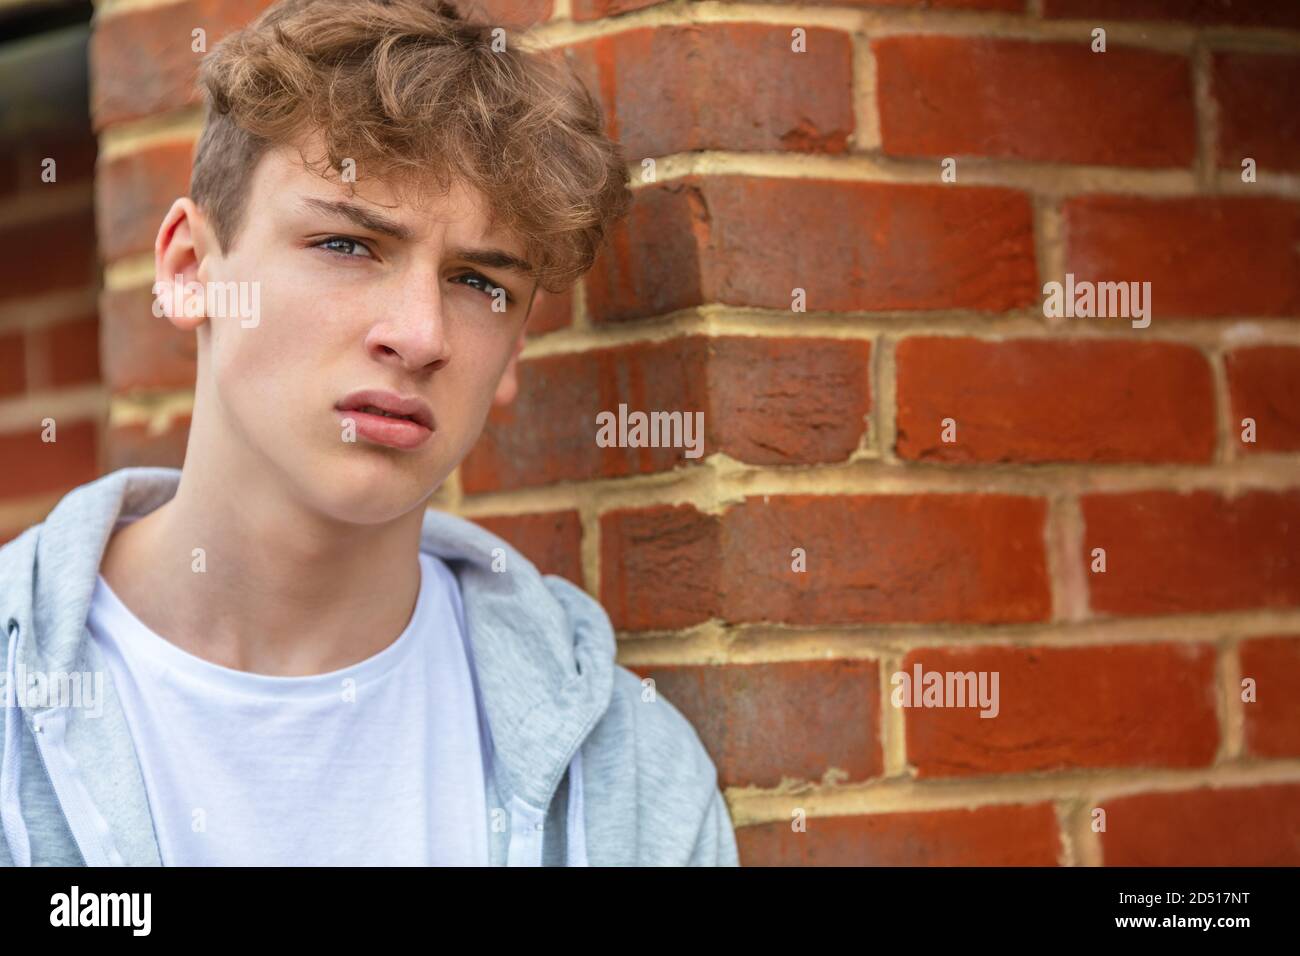 Serious male boy teenager outside leaning on brick wall wearing a gray hoody in urban city Stock Photo